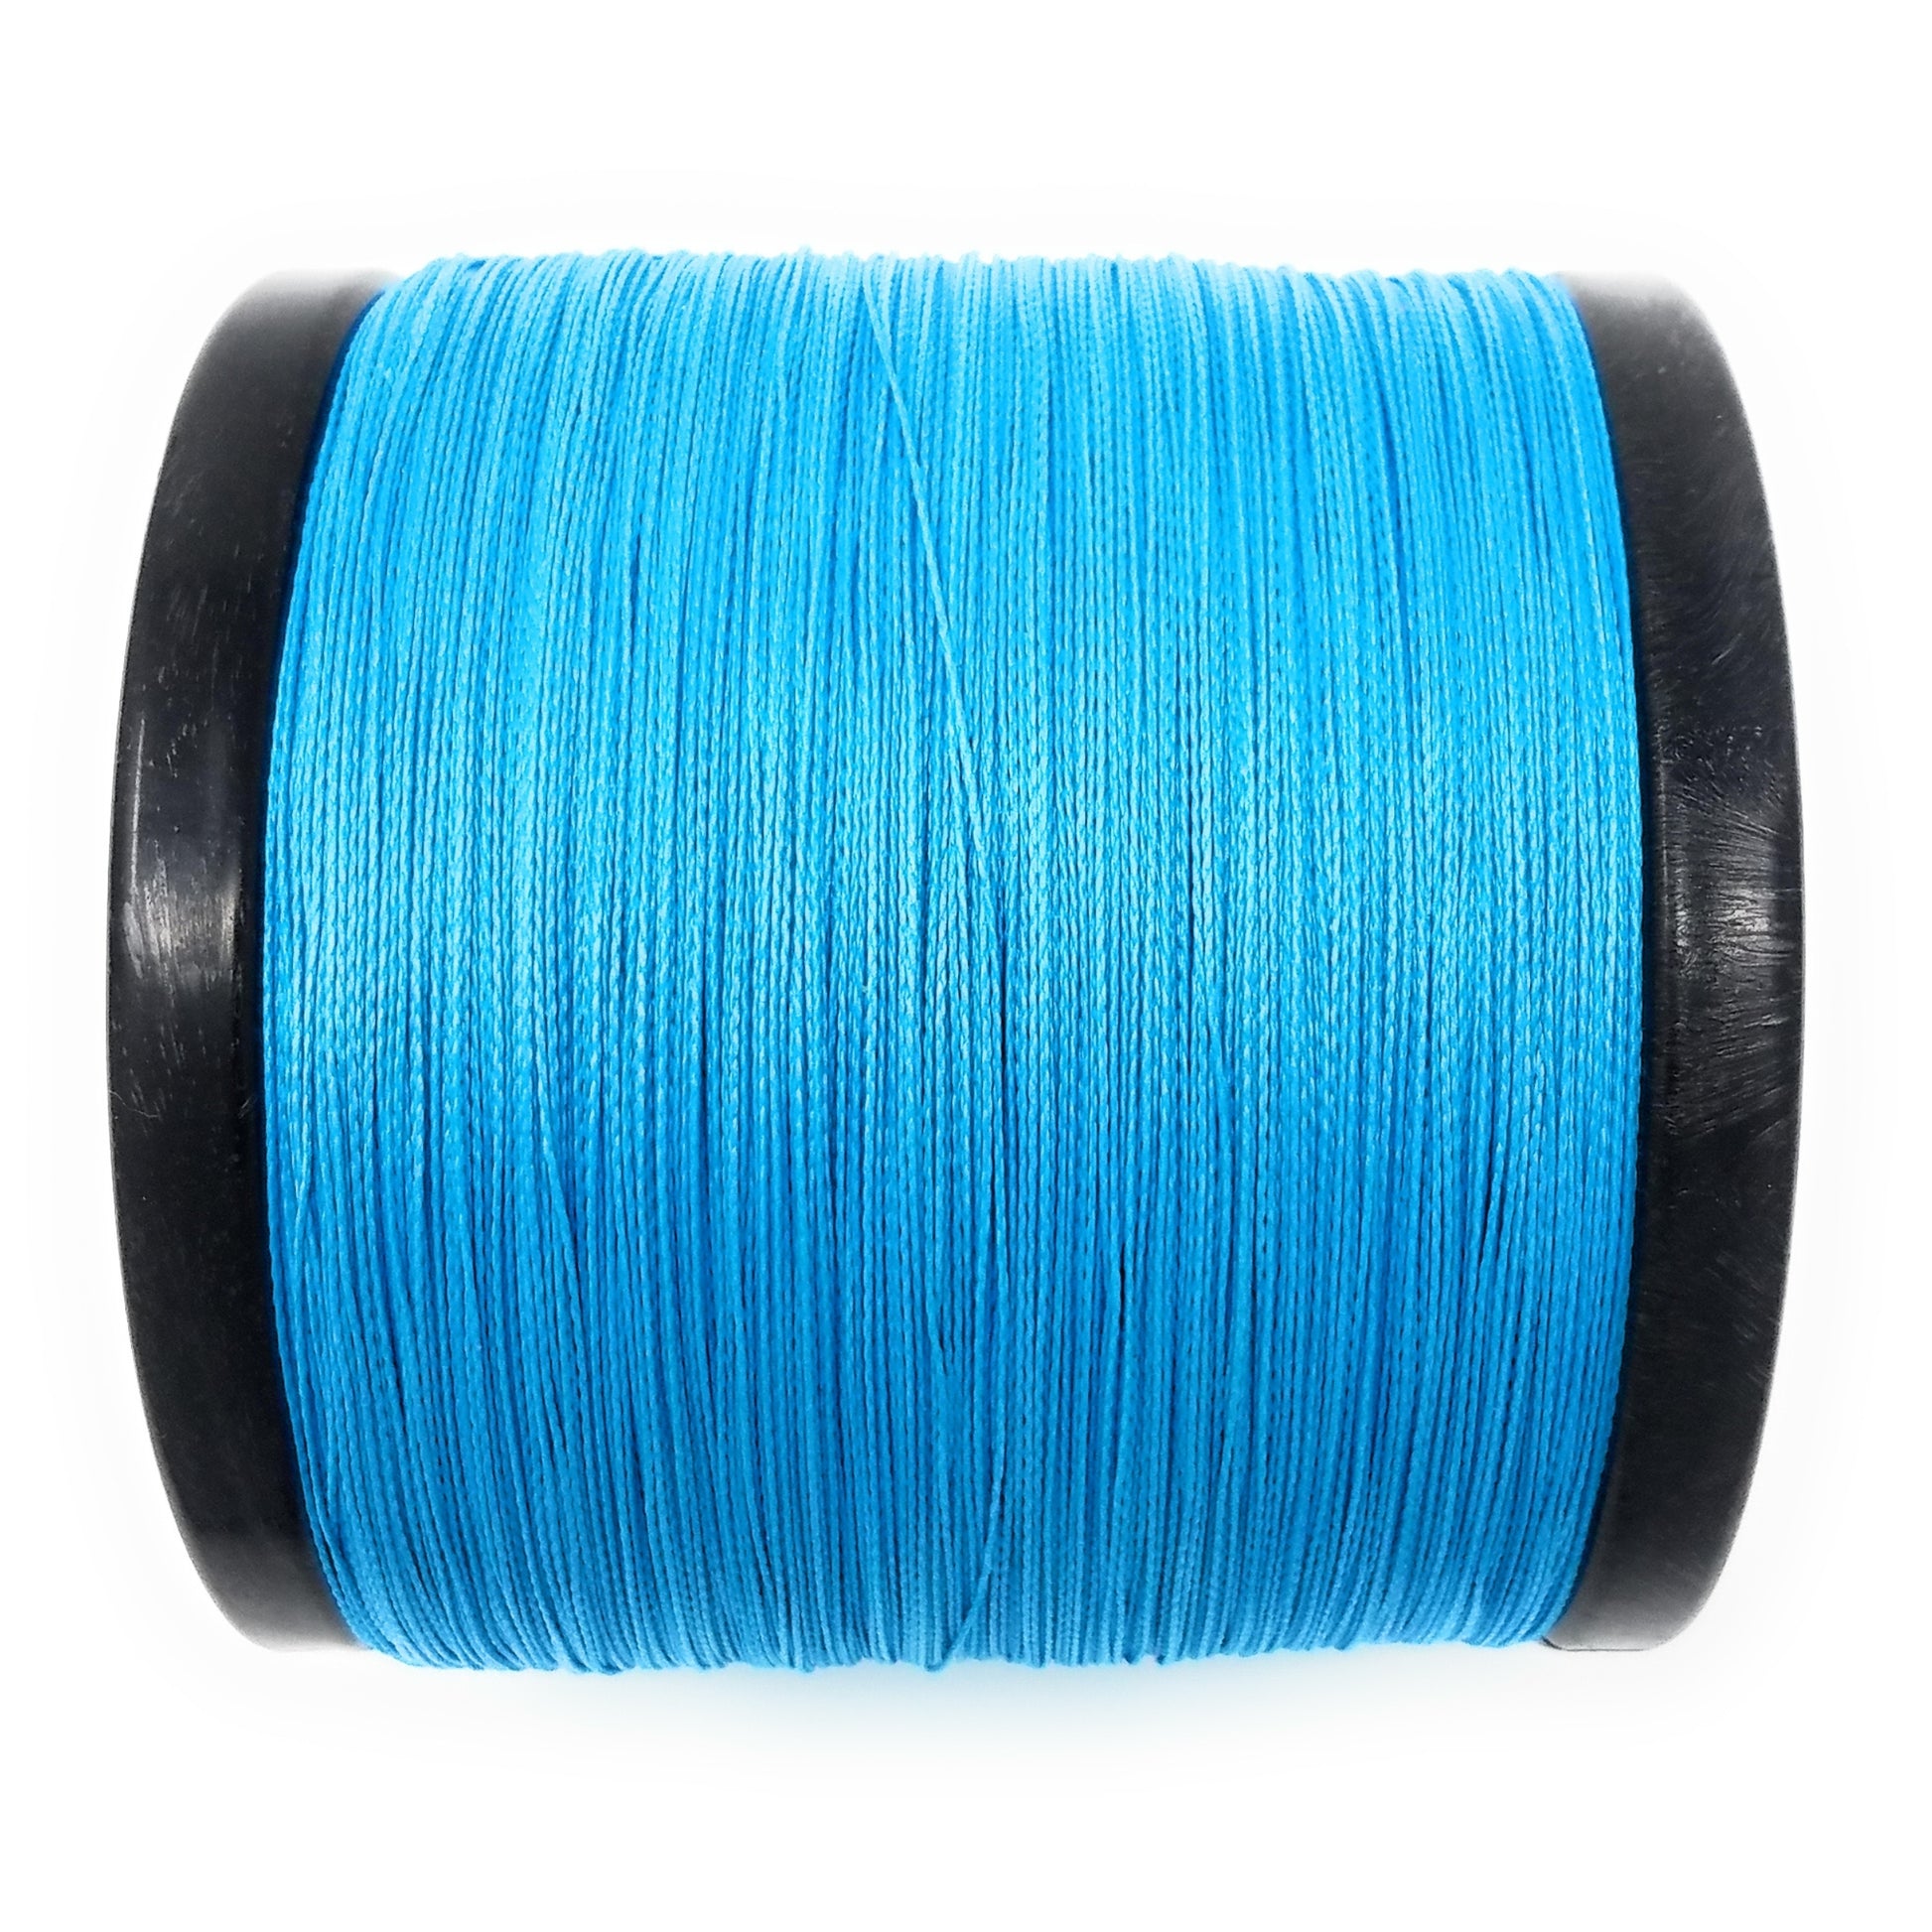 Reaction Tackle Braided Fishing Line Sea Blue 65lb 500yd, Size: 65 lbs